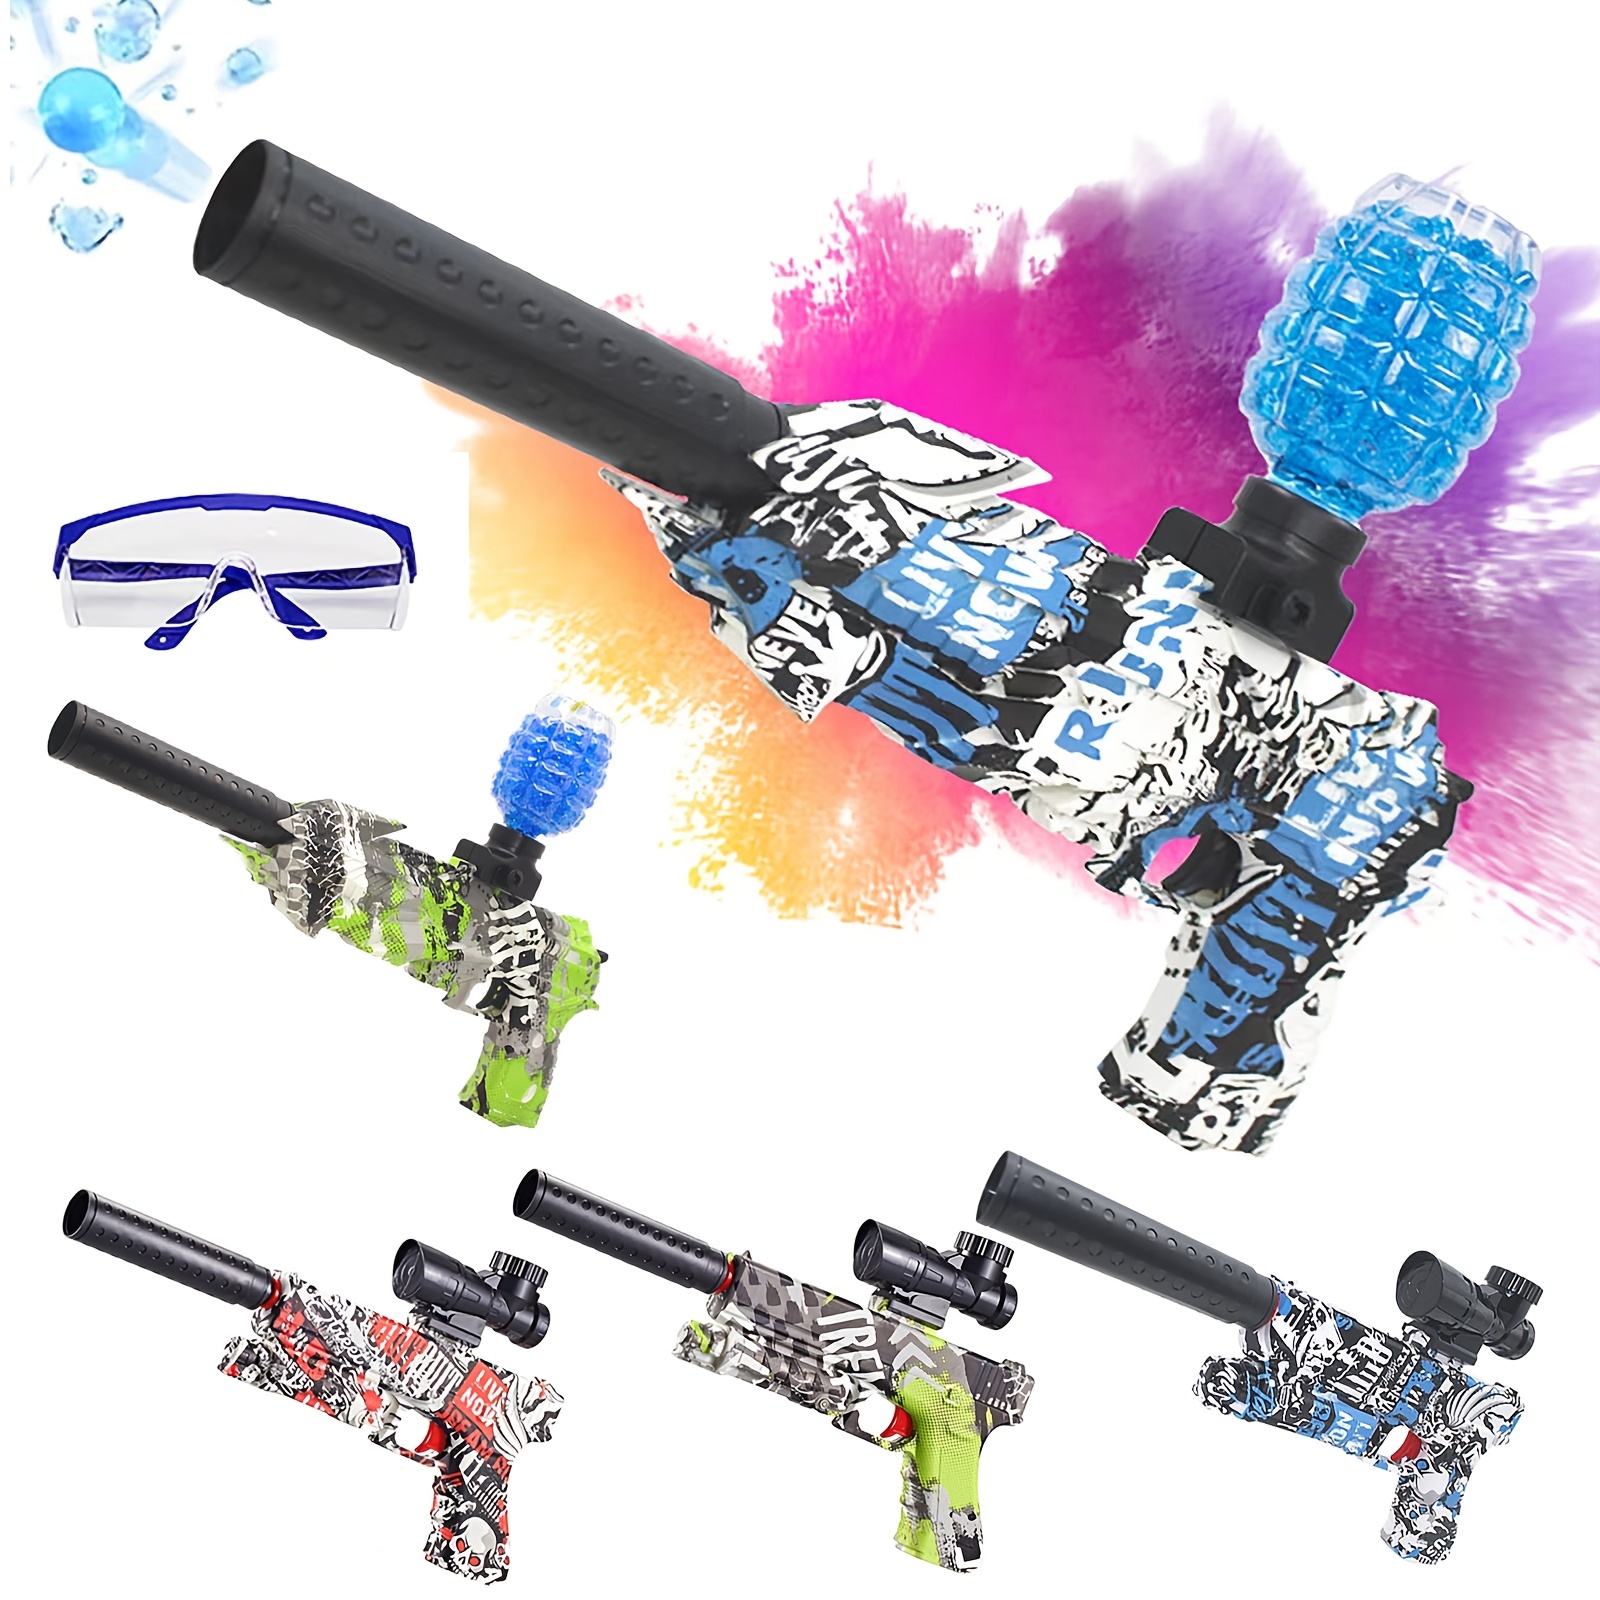 Glock Electric Gel Blaster Gun Set With Goggles High Precision Shooting Toy Rechargeable And Reusable Easy To Operate Perfect Toy For Kids And Adults Experience Endless Fun No Gel Balls Included